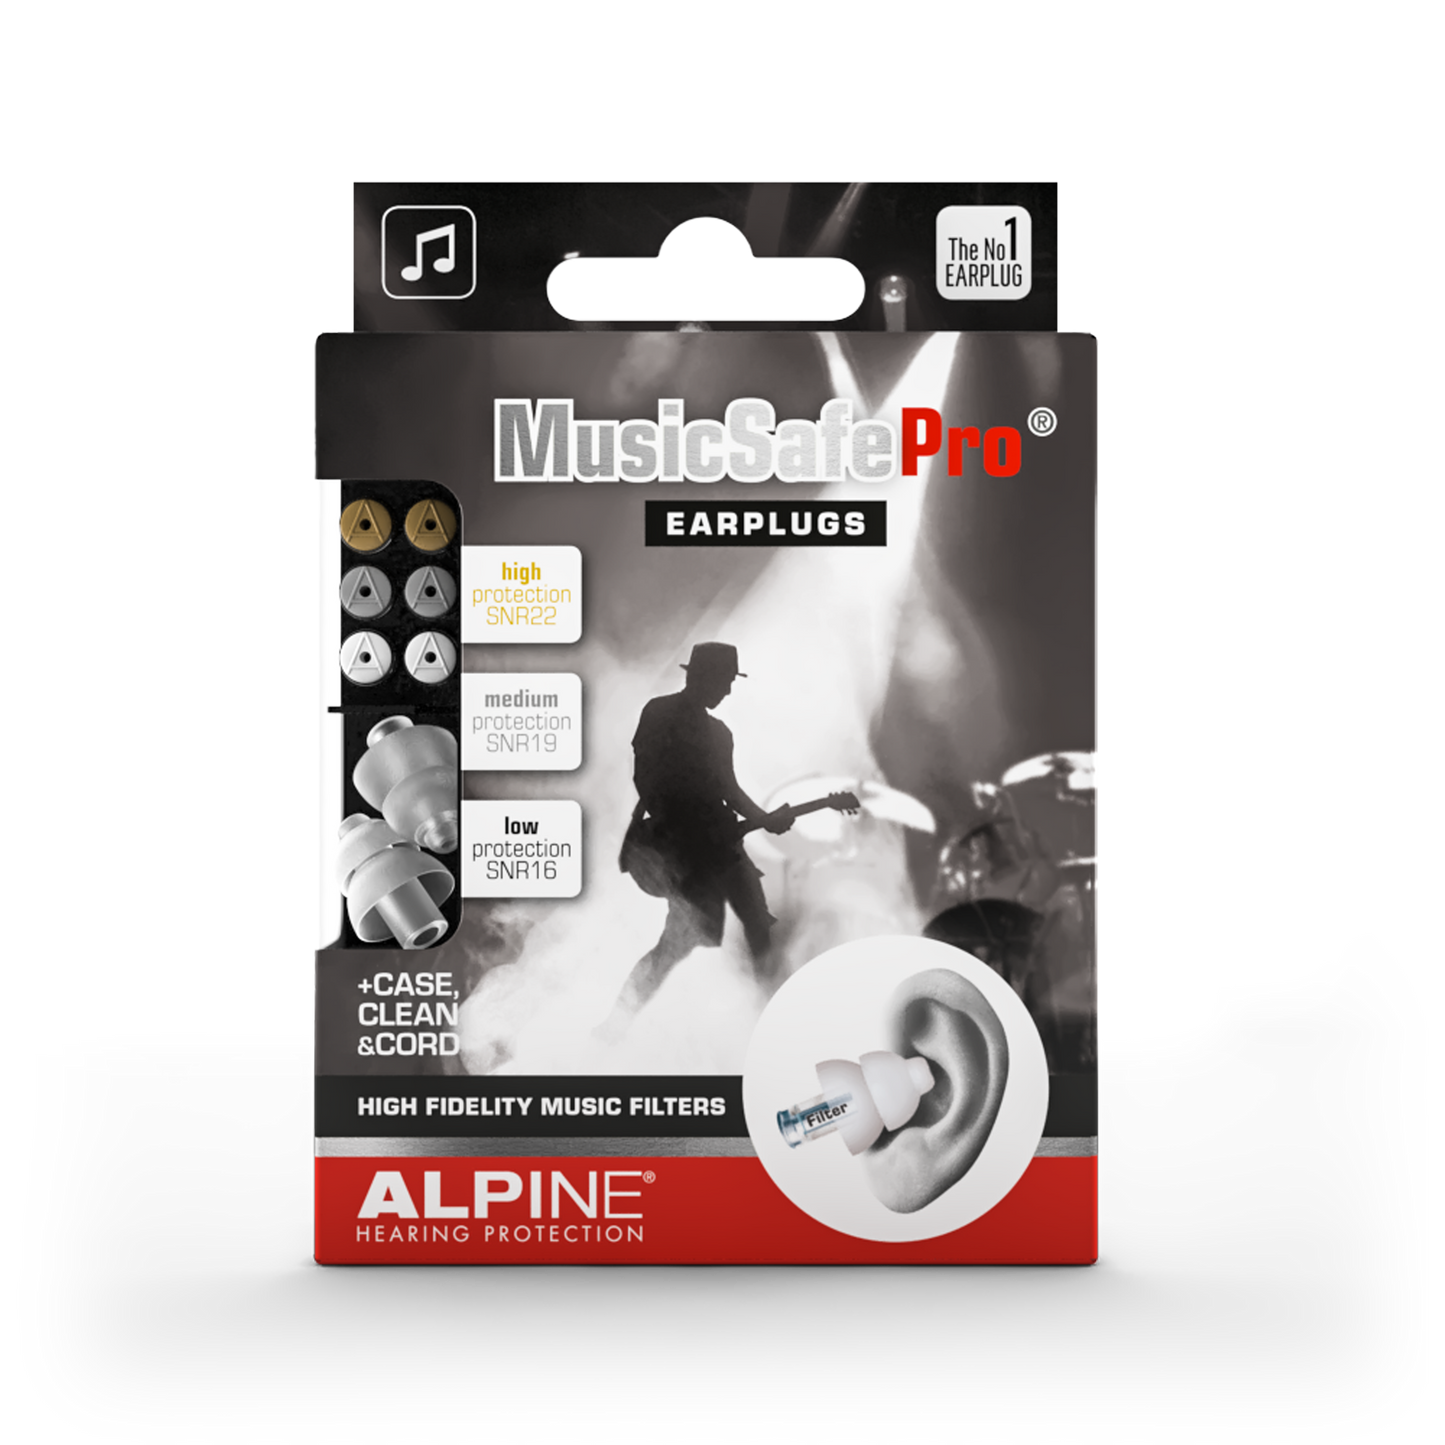 Alpine MusicSafe Pro earplugs for musicians Alpine hearing protection Earplugs earmuffs protect your ear red dot award party concert festival partyplug MusicSafe MusicSafe Earmuff MusicSafe Pro